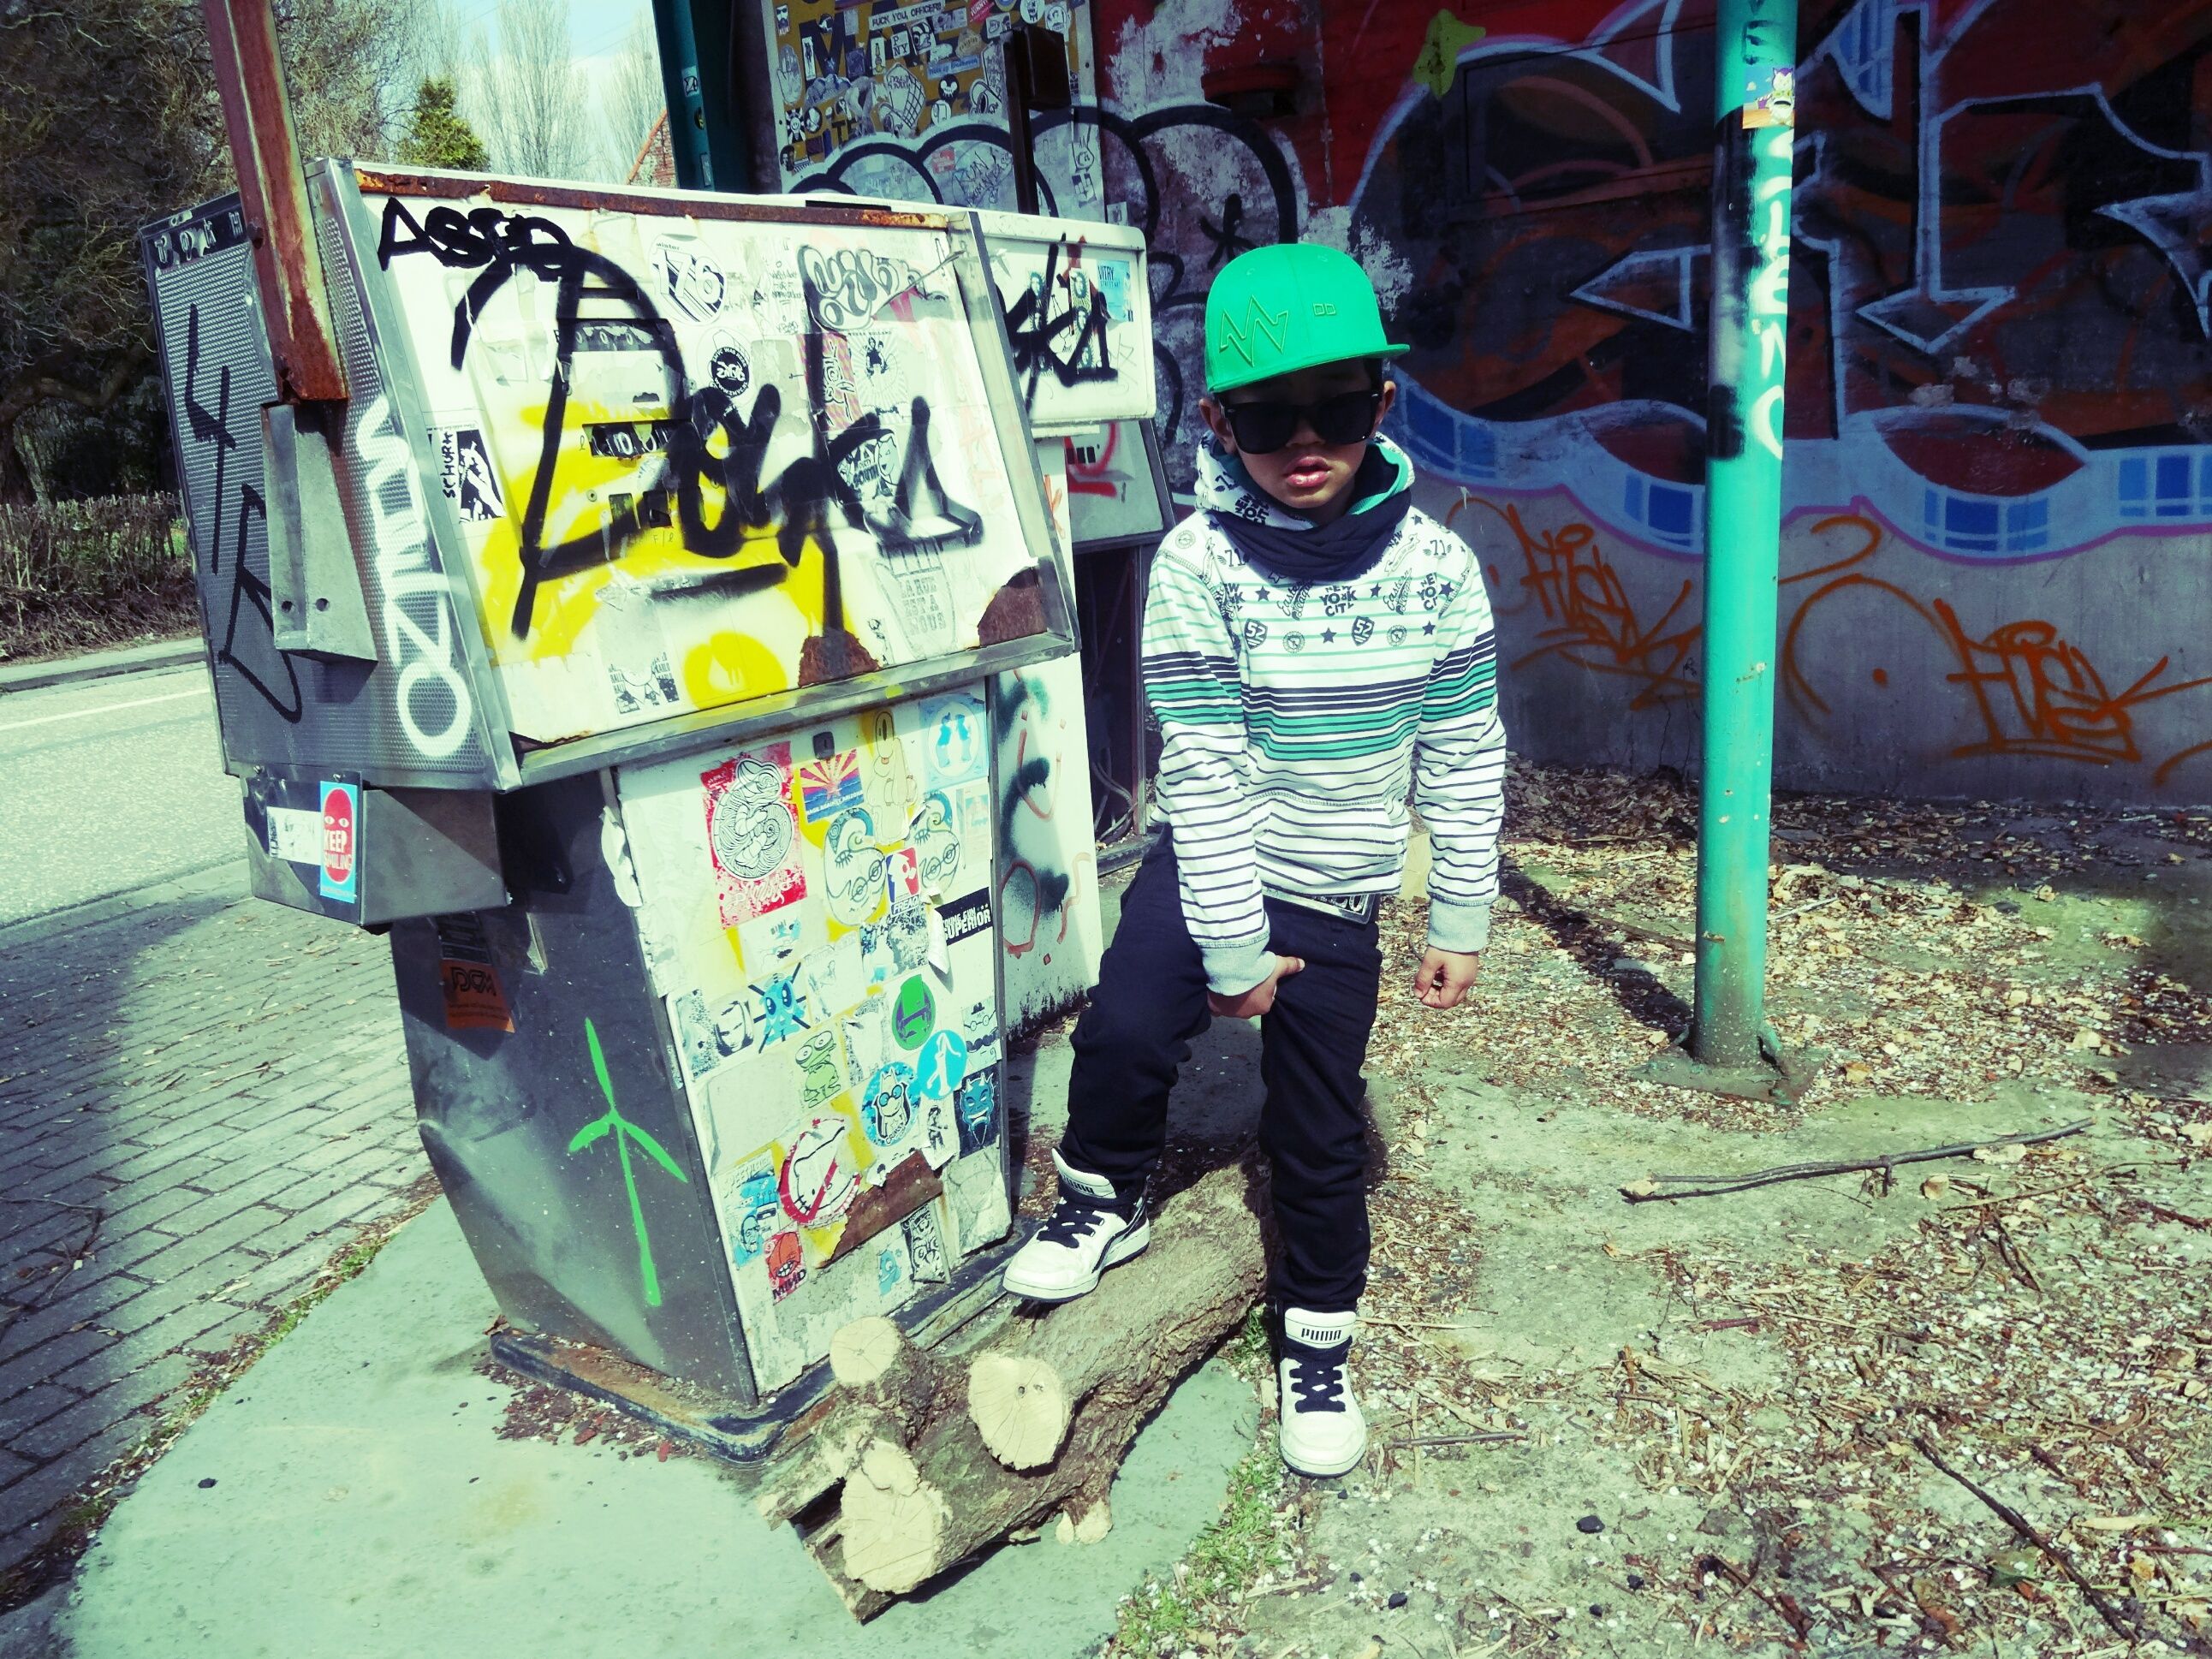 A boy in a green cap, swag wallpaper and image